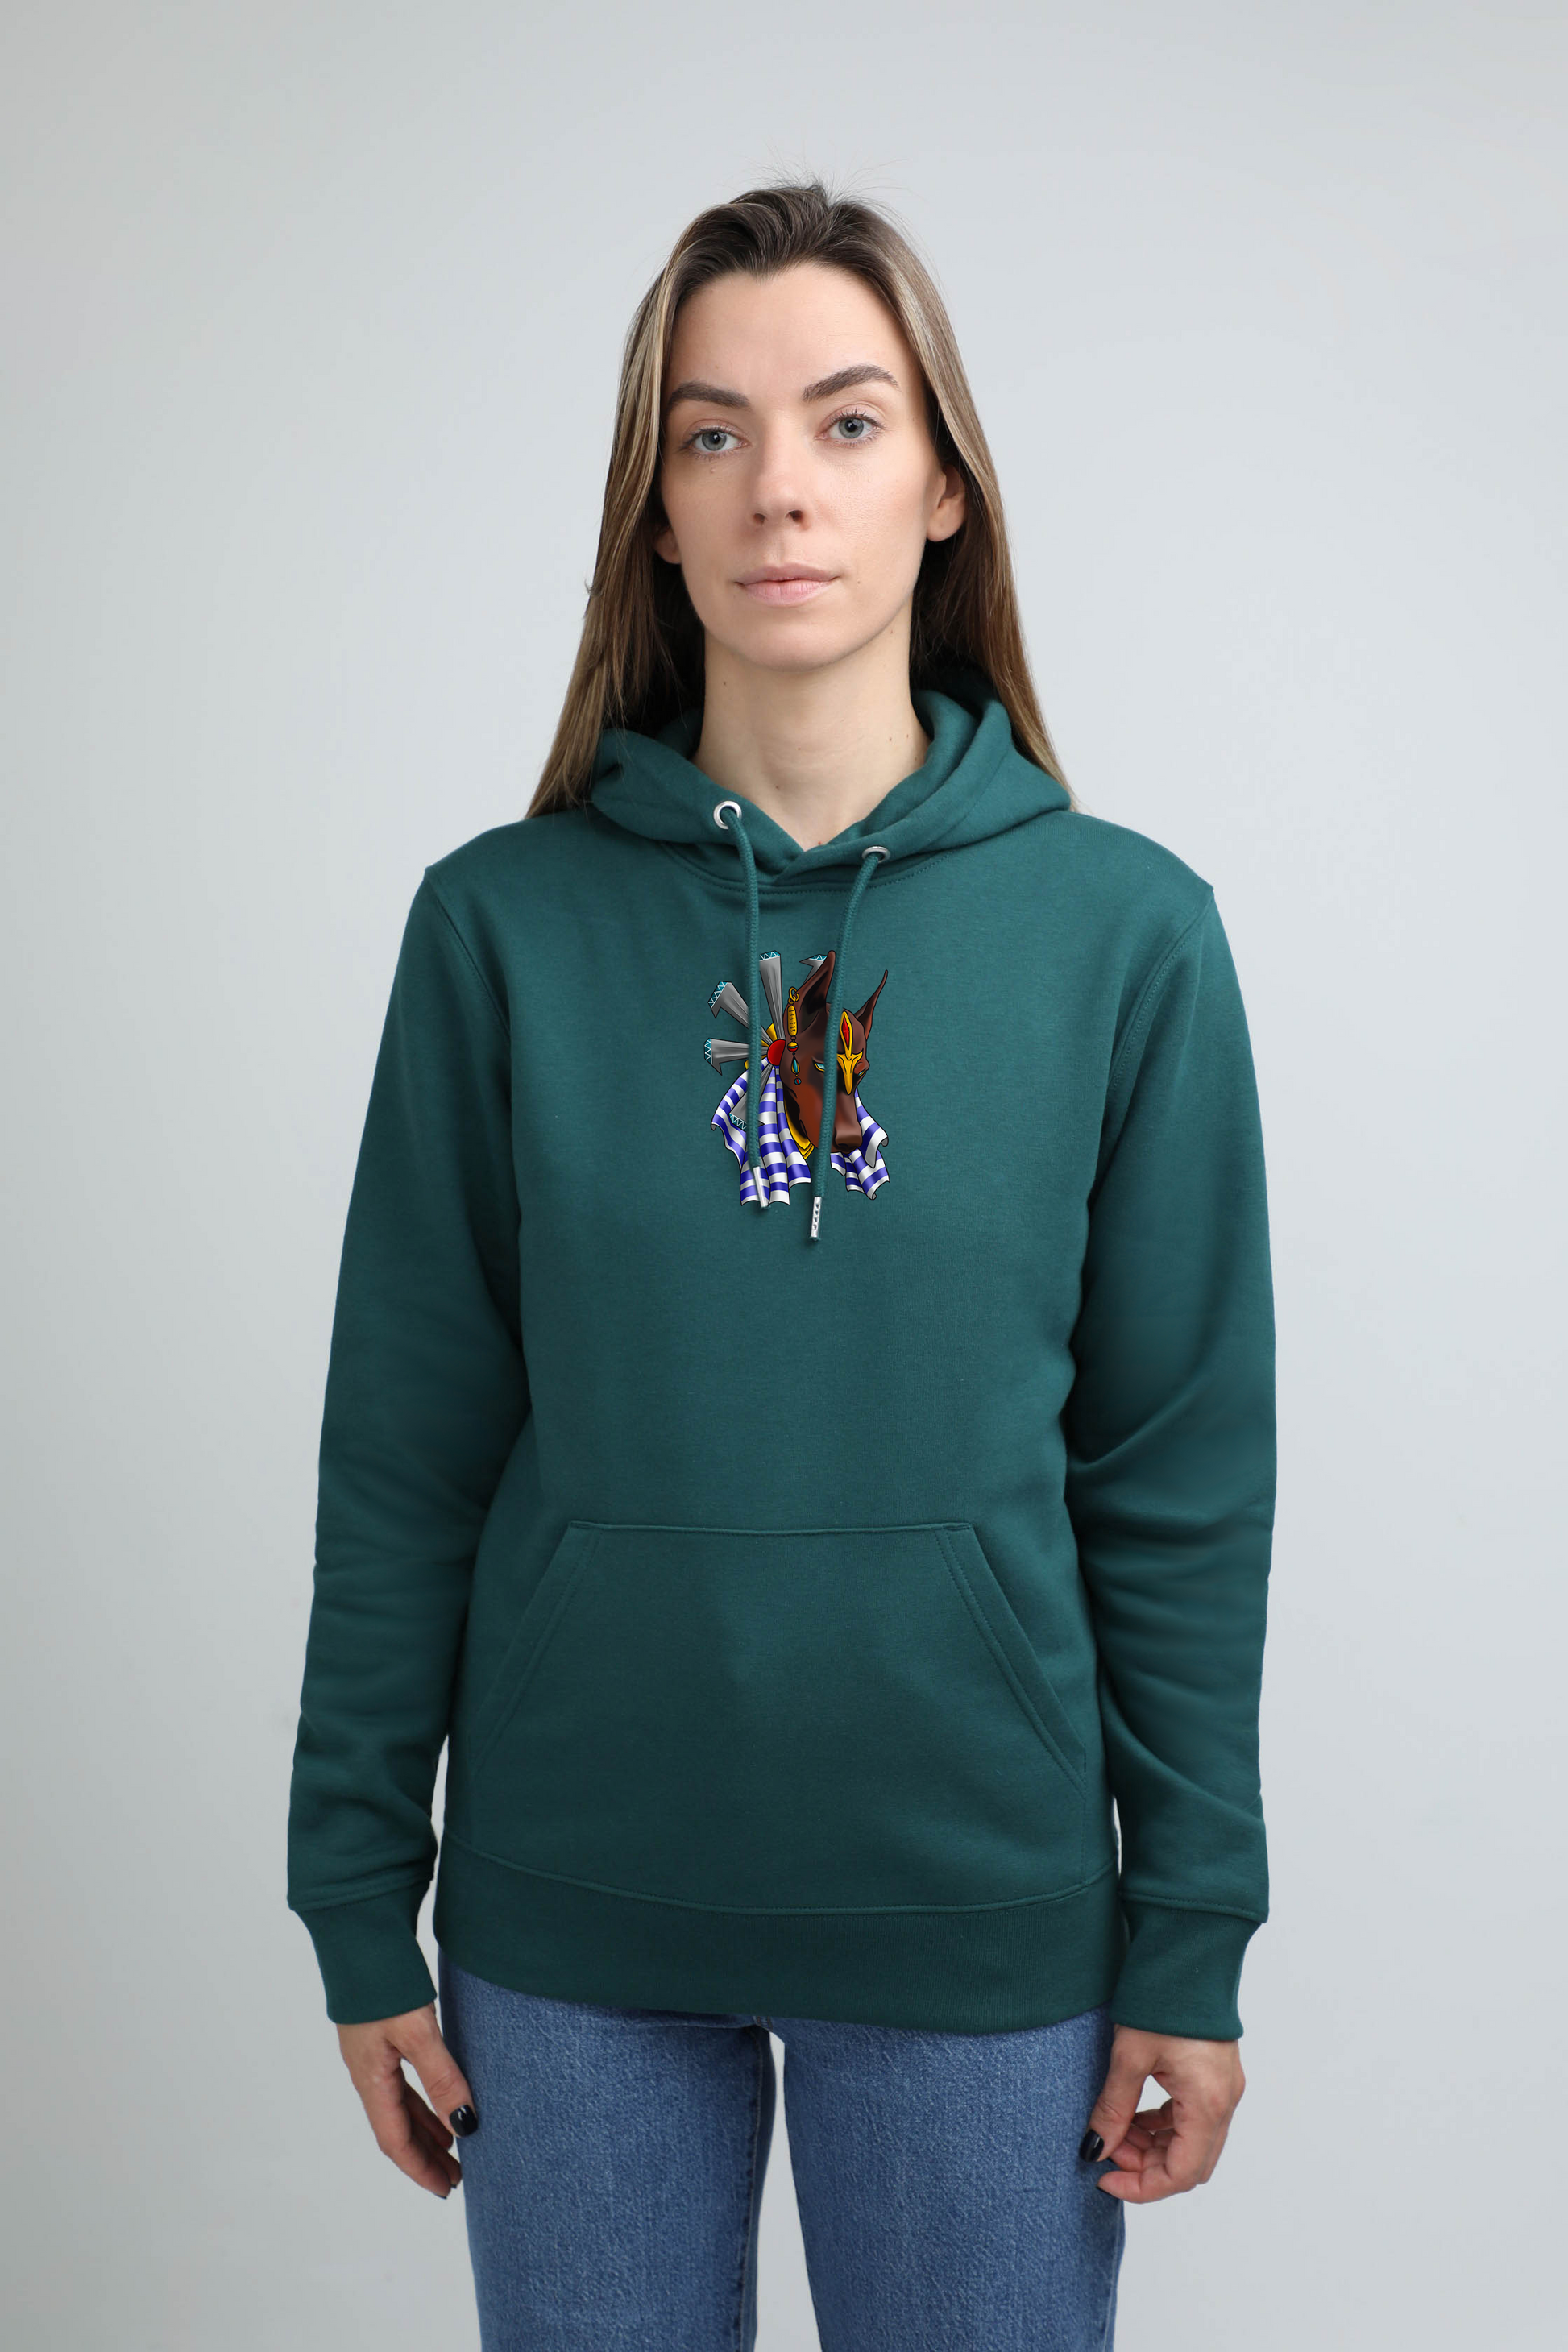 Egyptian dog | Hoodie with dog. Regular fit | Unisex by My Wild Other